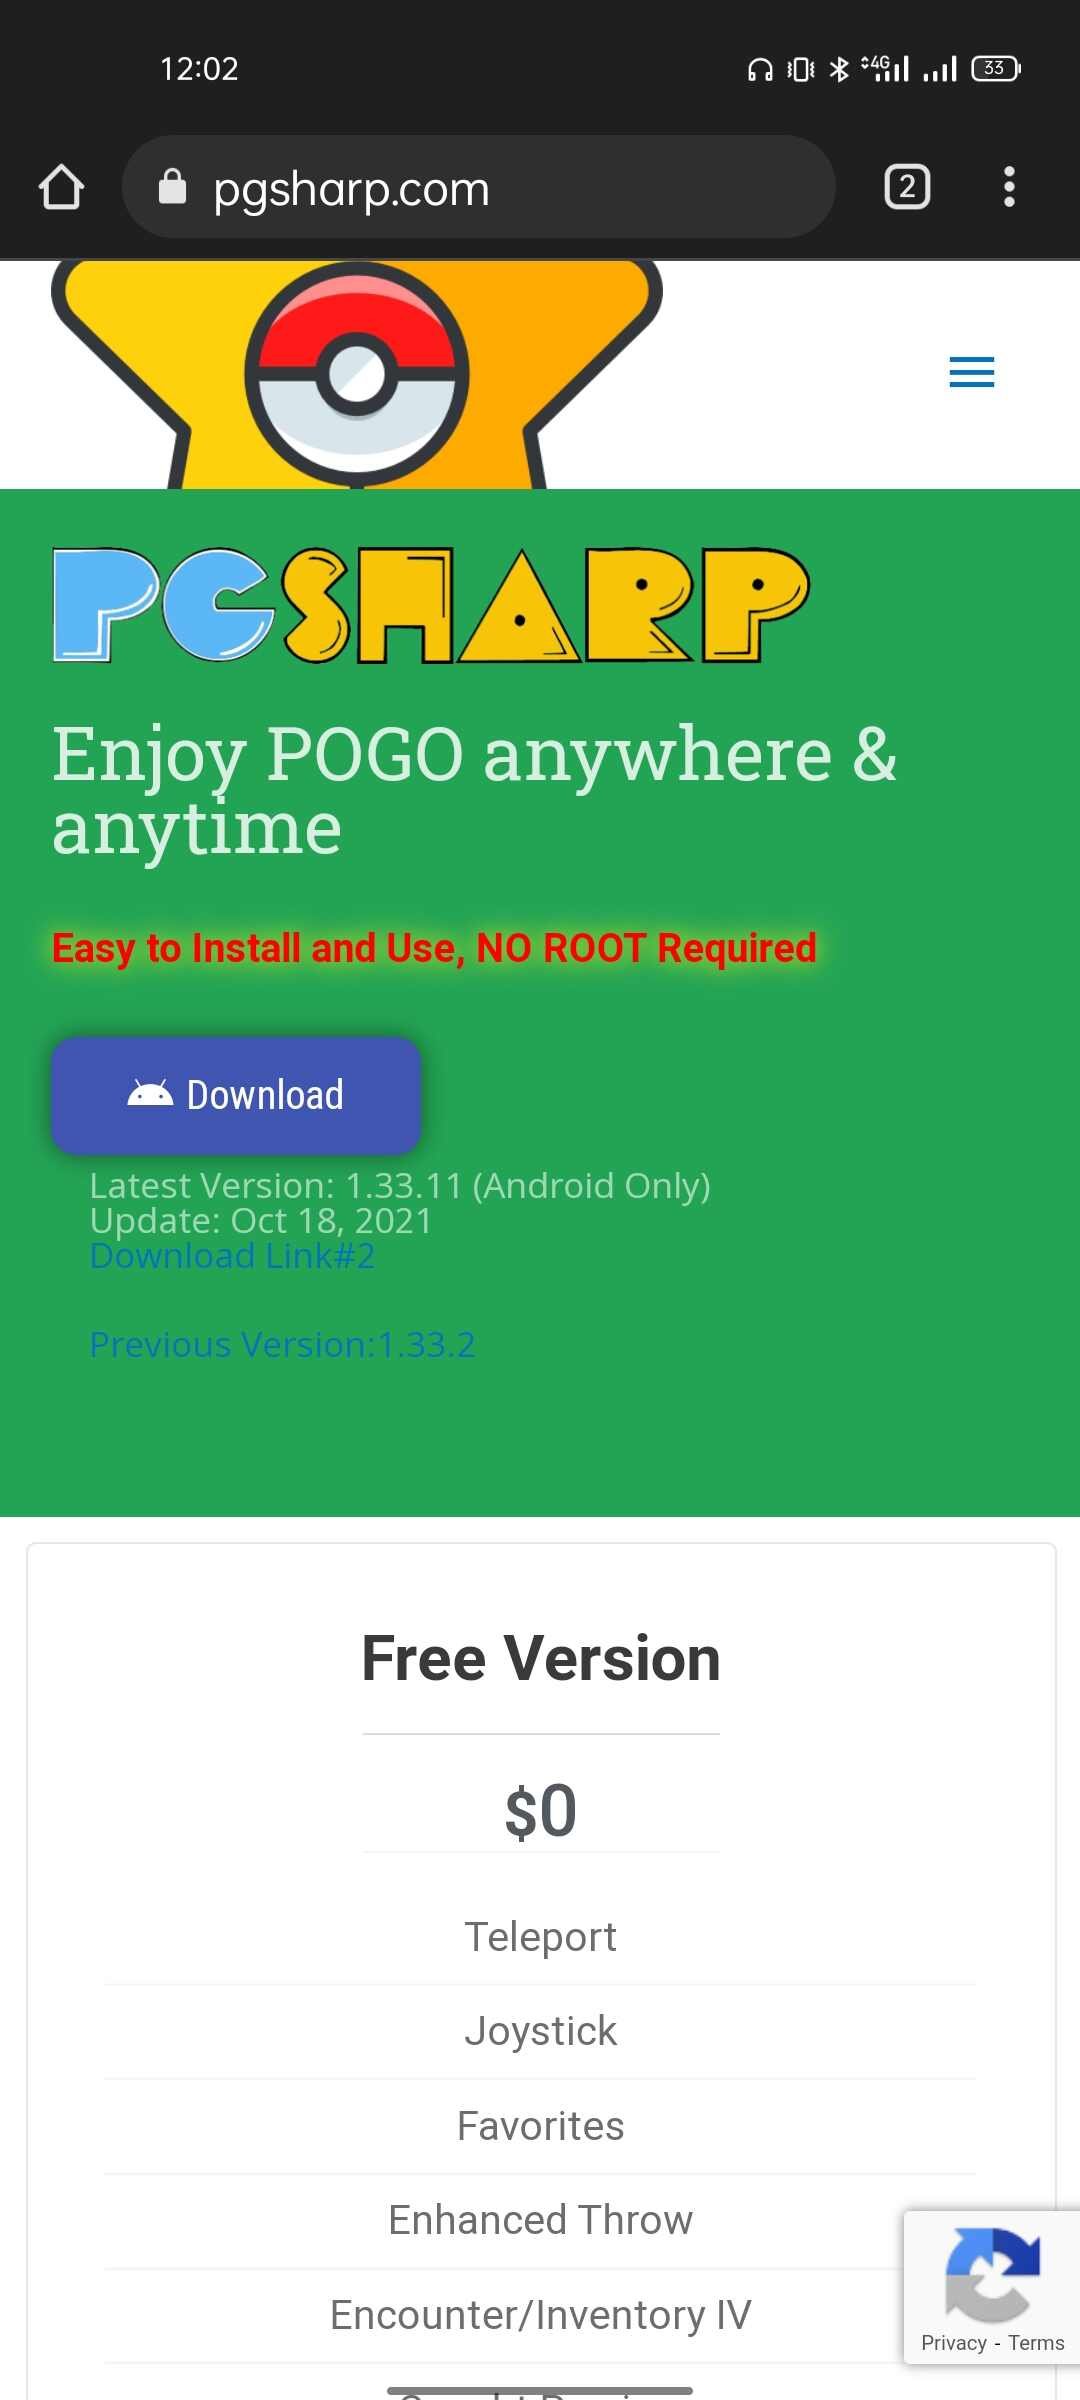 Pgsharp 100iv feed not working : r/PoGoAndroidSpoofing